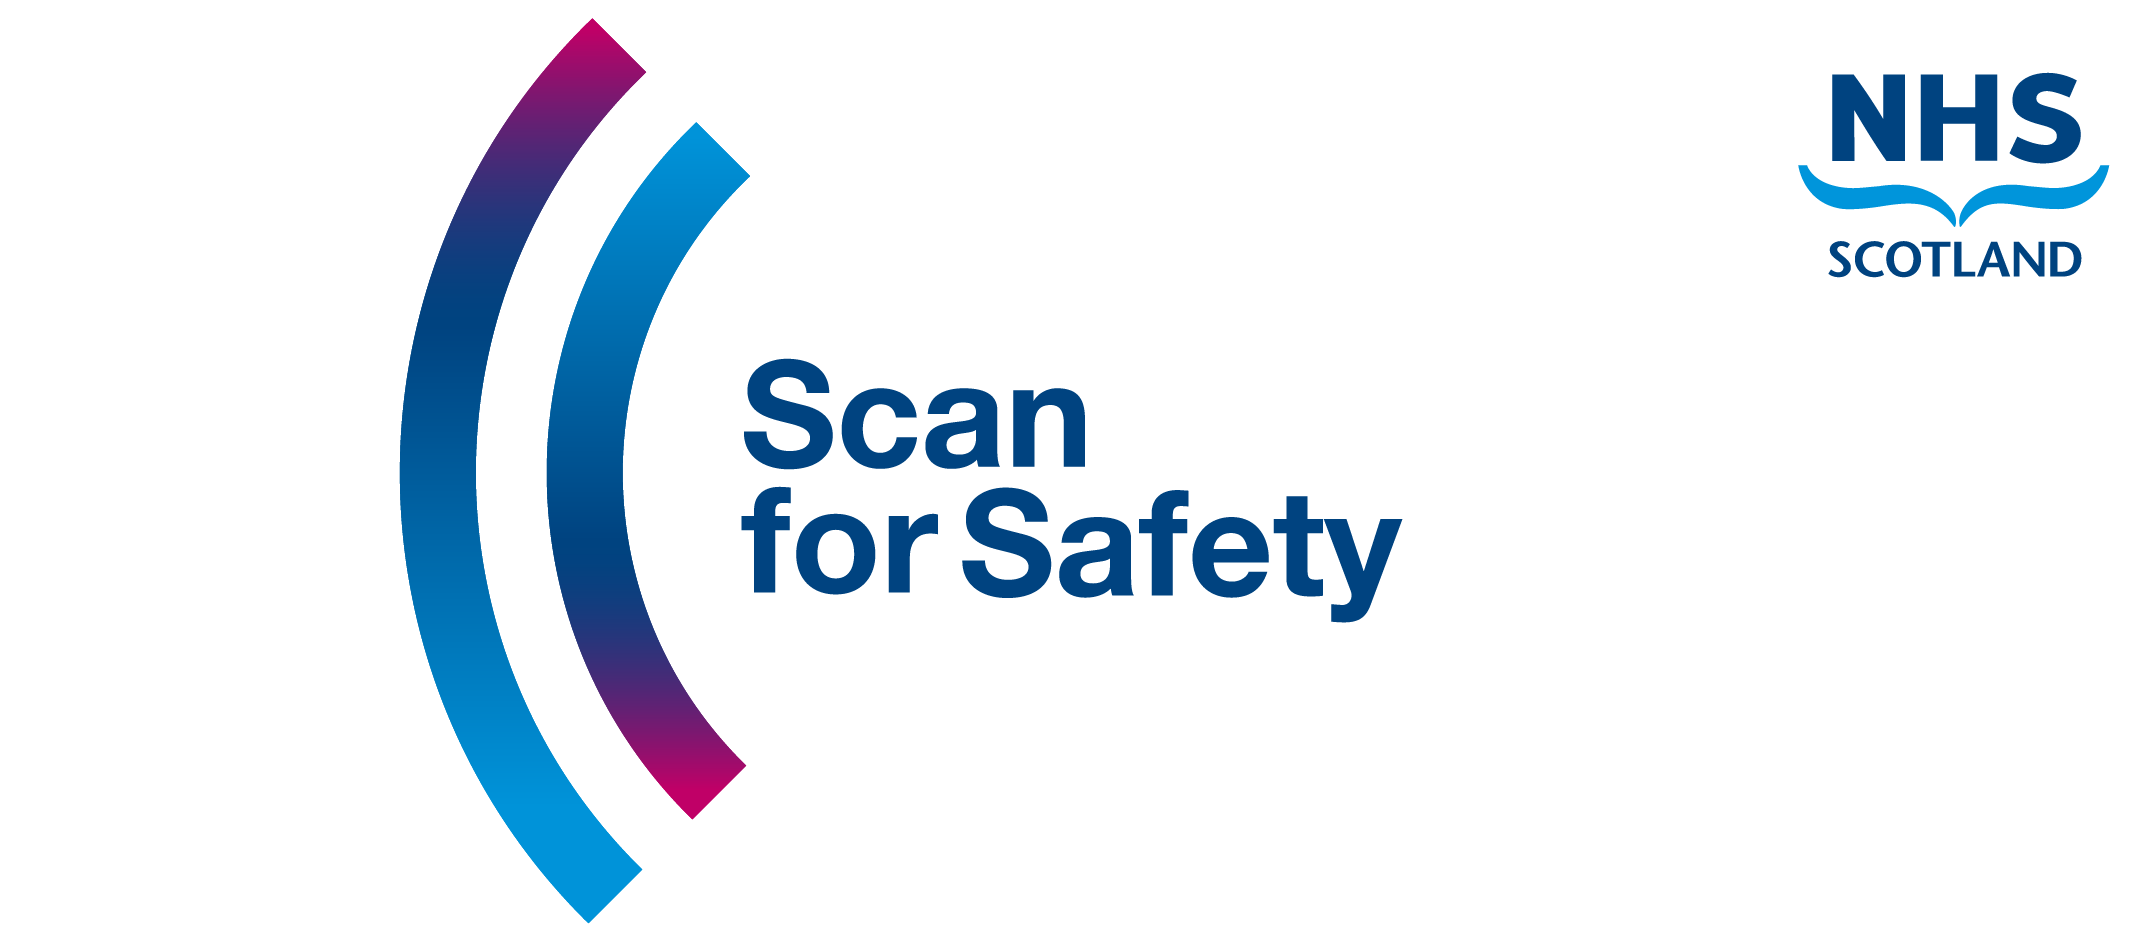 Visual identity for NHS Scotland's Scan for Safety